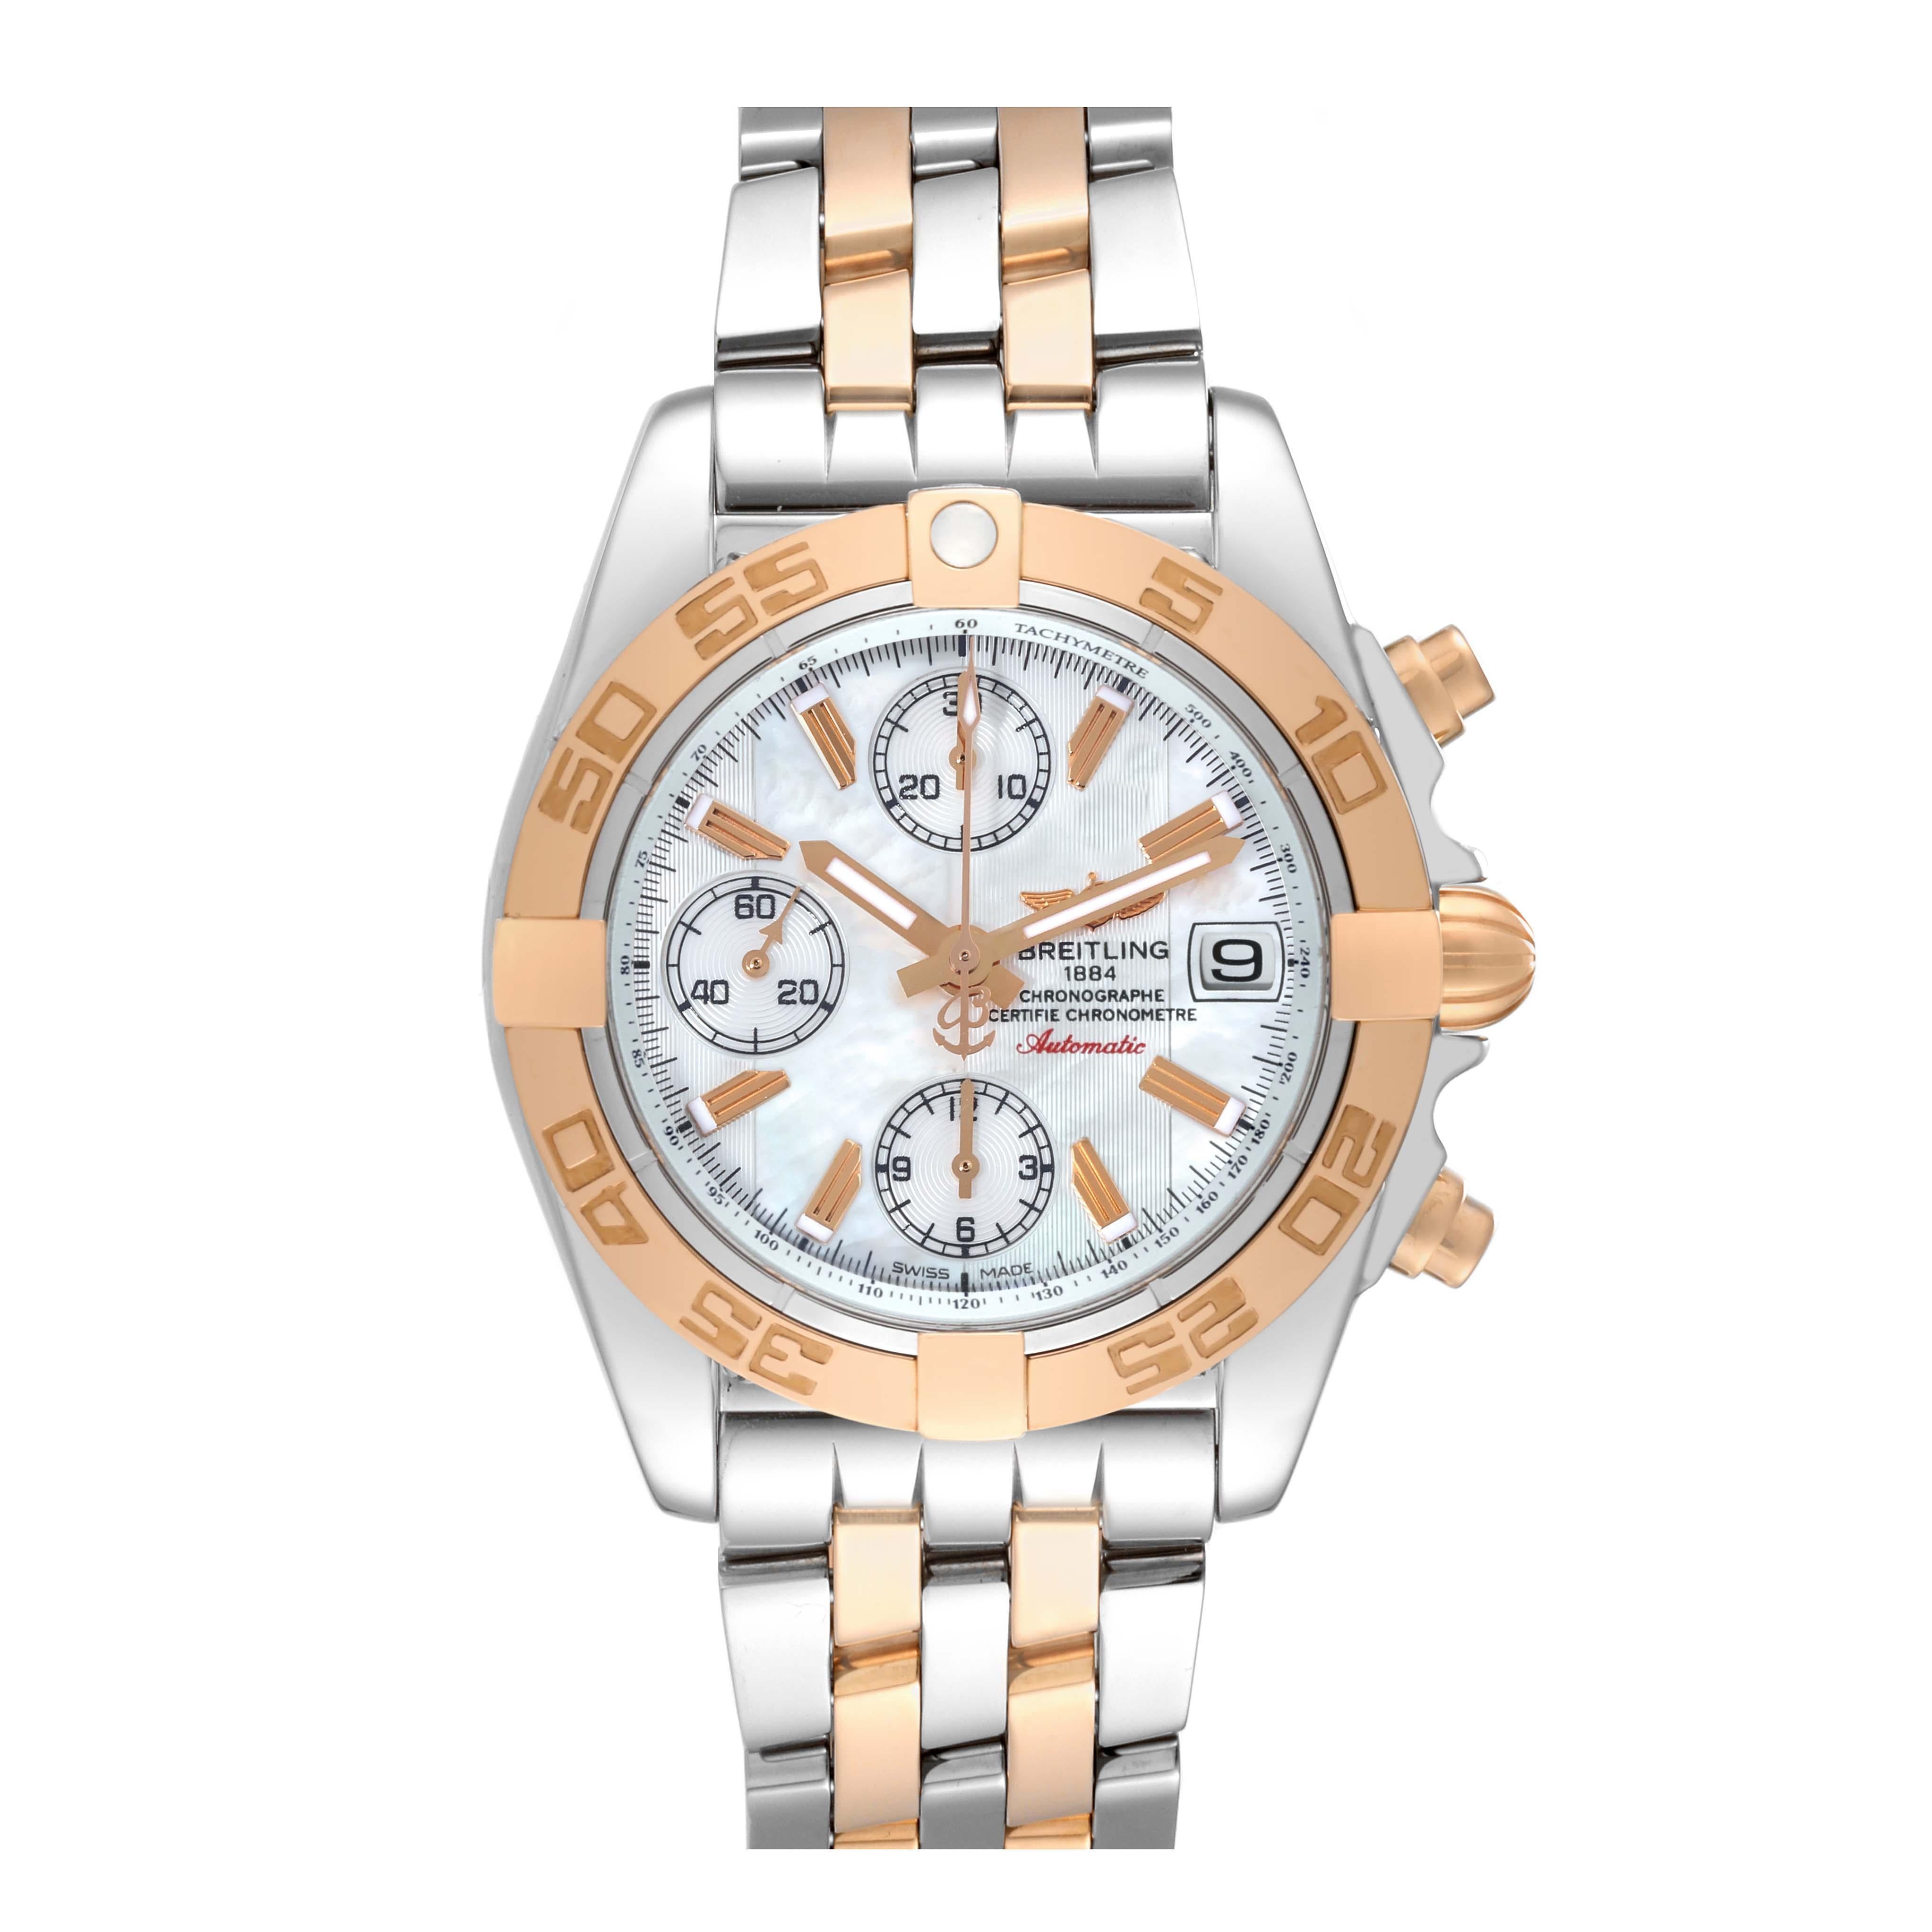 Breitling Chrono Galactic Mother Of Pearl Dial Rose Gold Steel Mens Watch C13358. Automatic self-winding officially certified chronometer movement. Chronograph function. Stainless steel and 18k rose gold case 39.0  mm in diameter. 18k rose gold